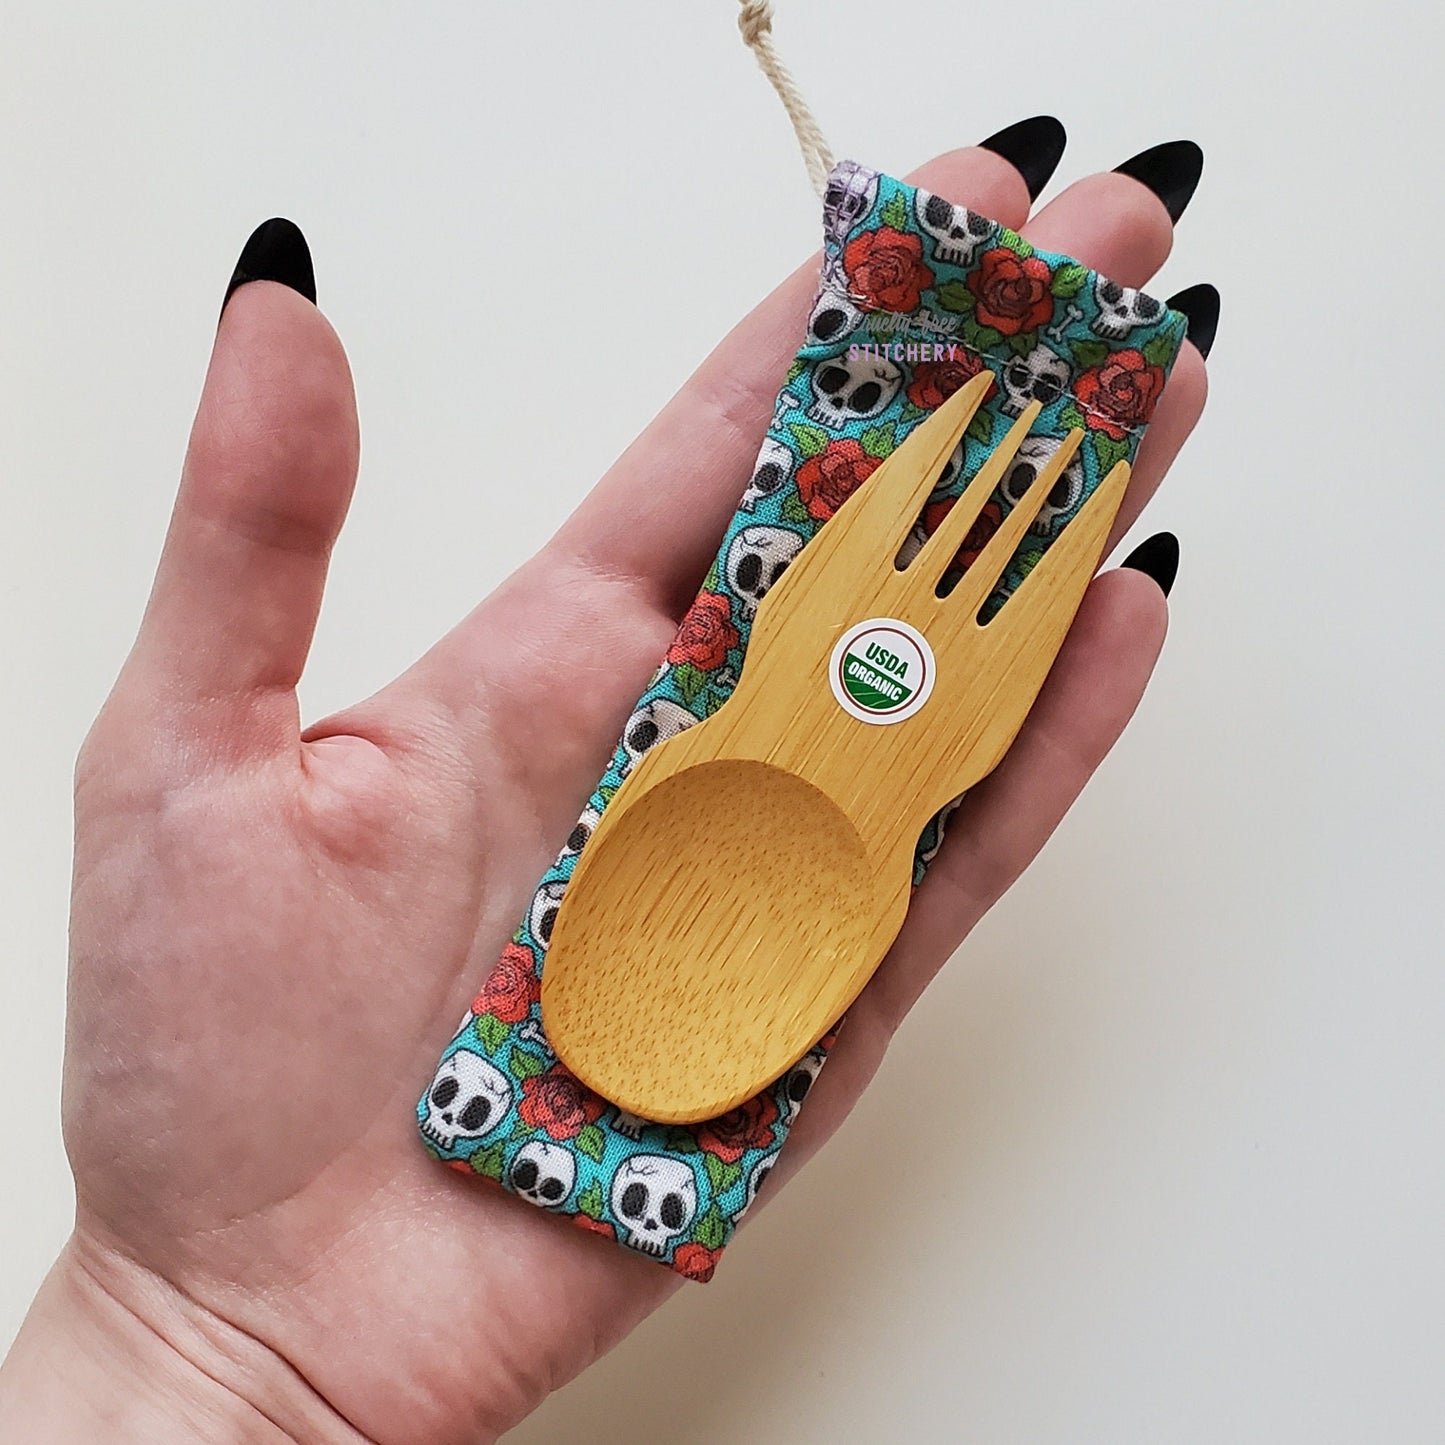 Reusable bamboo spork with pouch. Skull and roses print fabric pouch with bamboo spork on top, laid on a hand for size reference. The spork is slightly longer than the fingers.